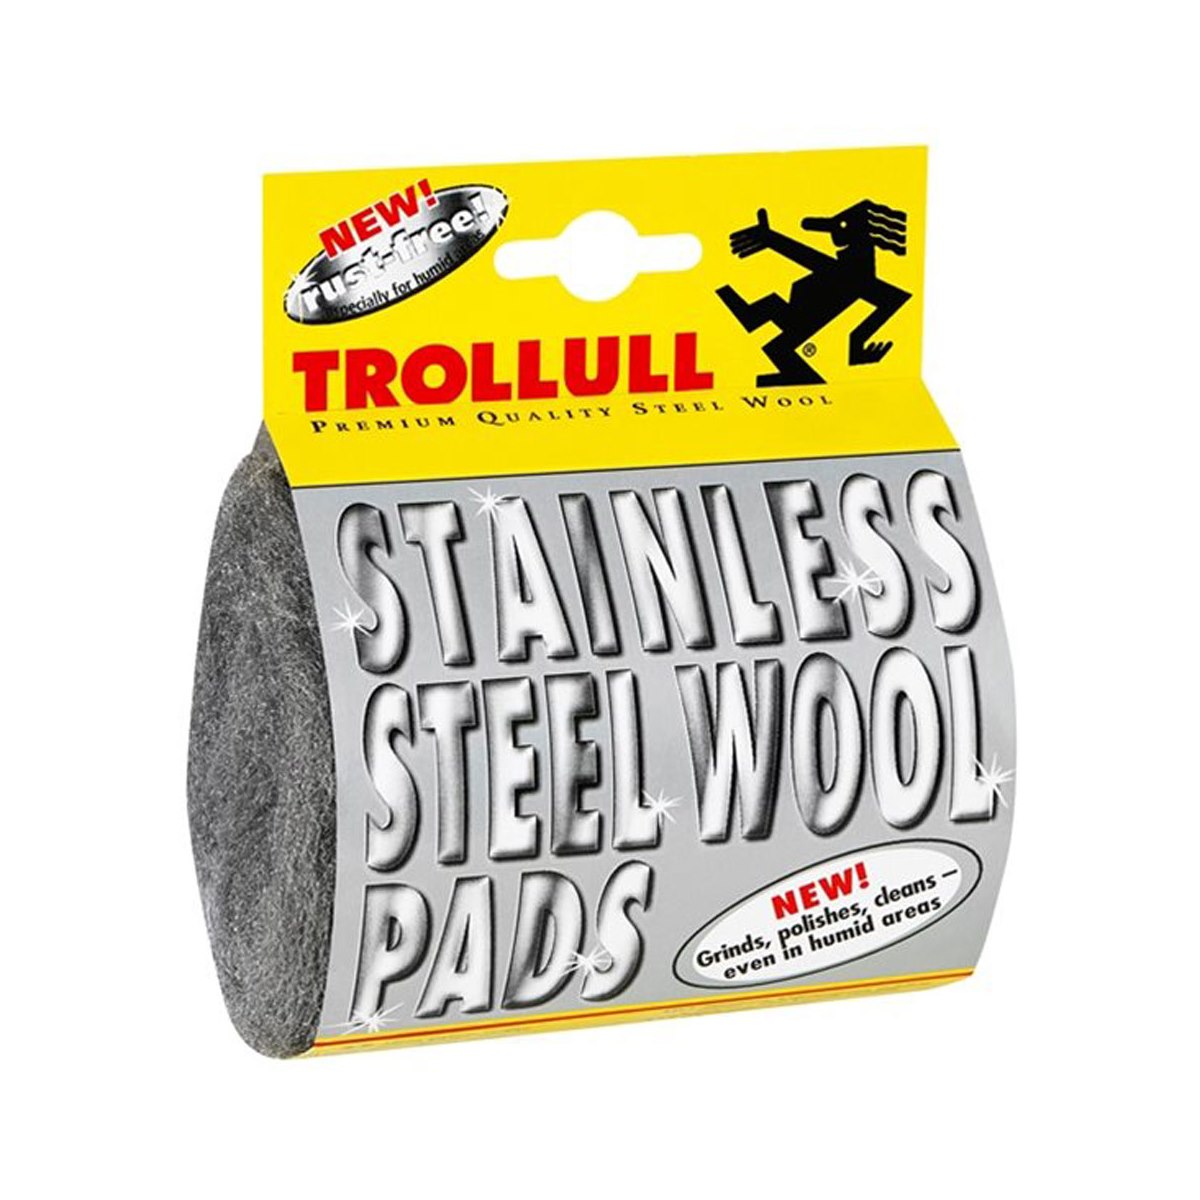 Trollull Stainless Steel Wool Pads